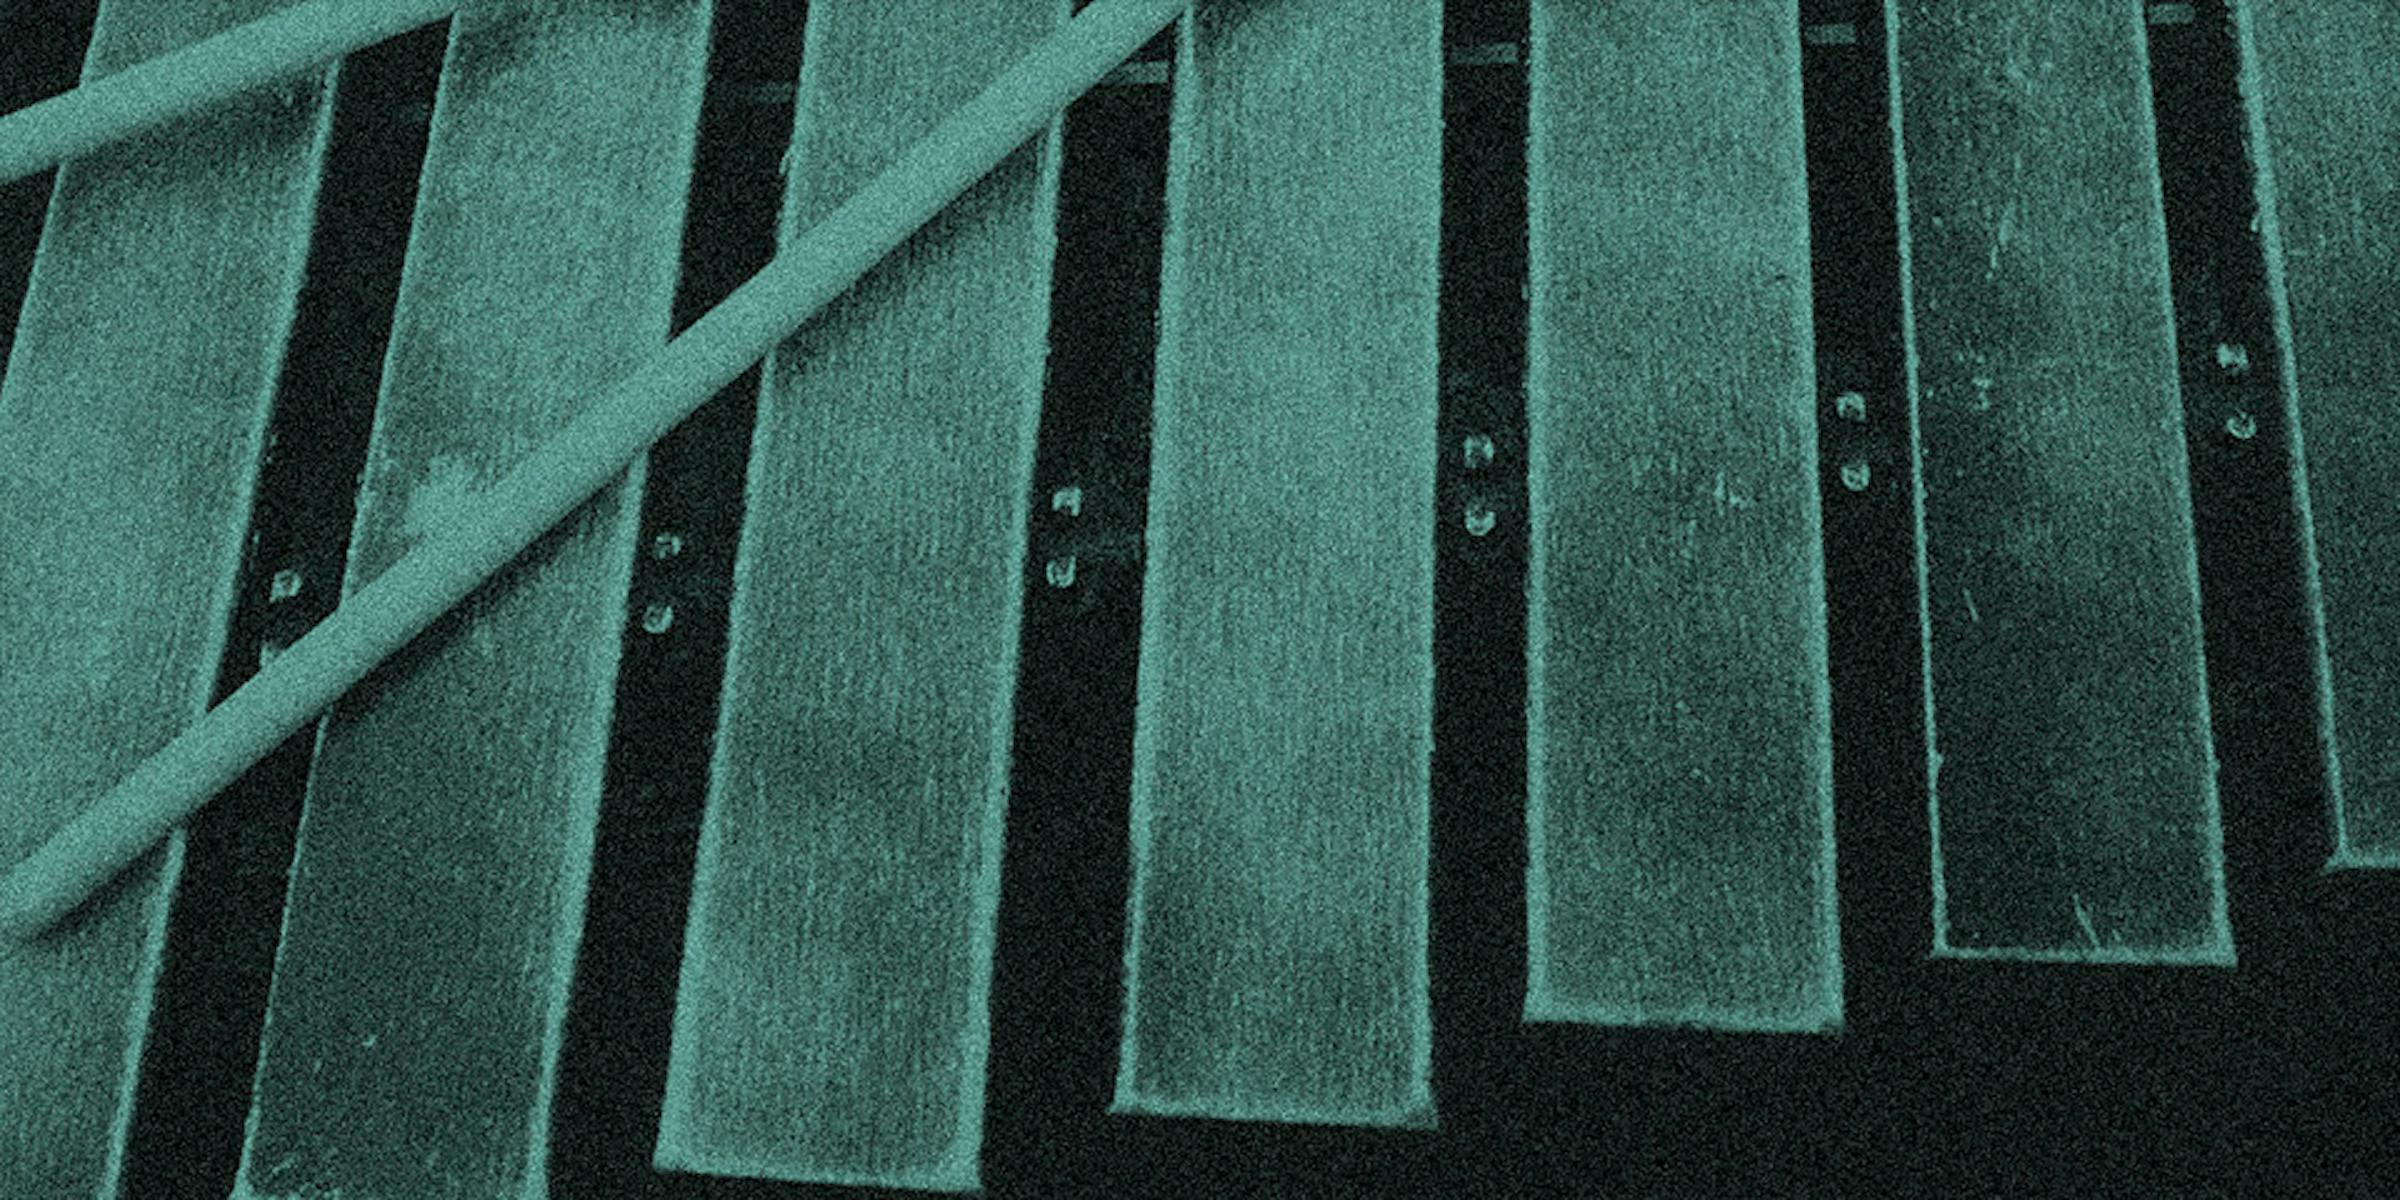 Xylophone close up with blue tint